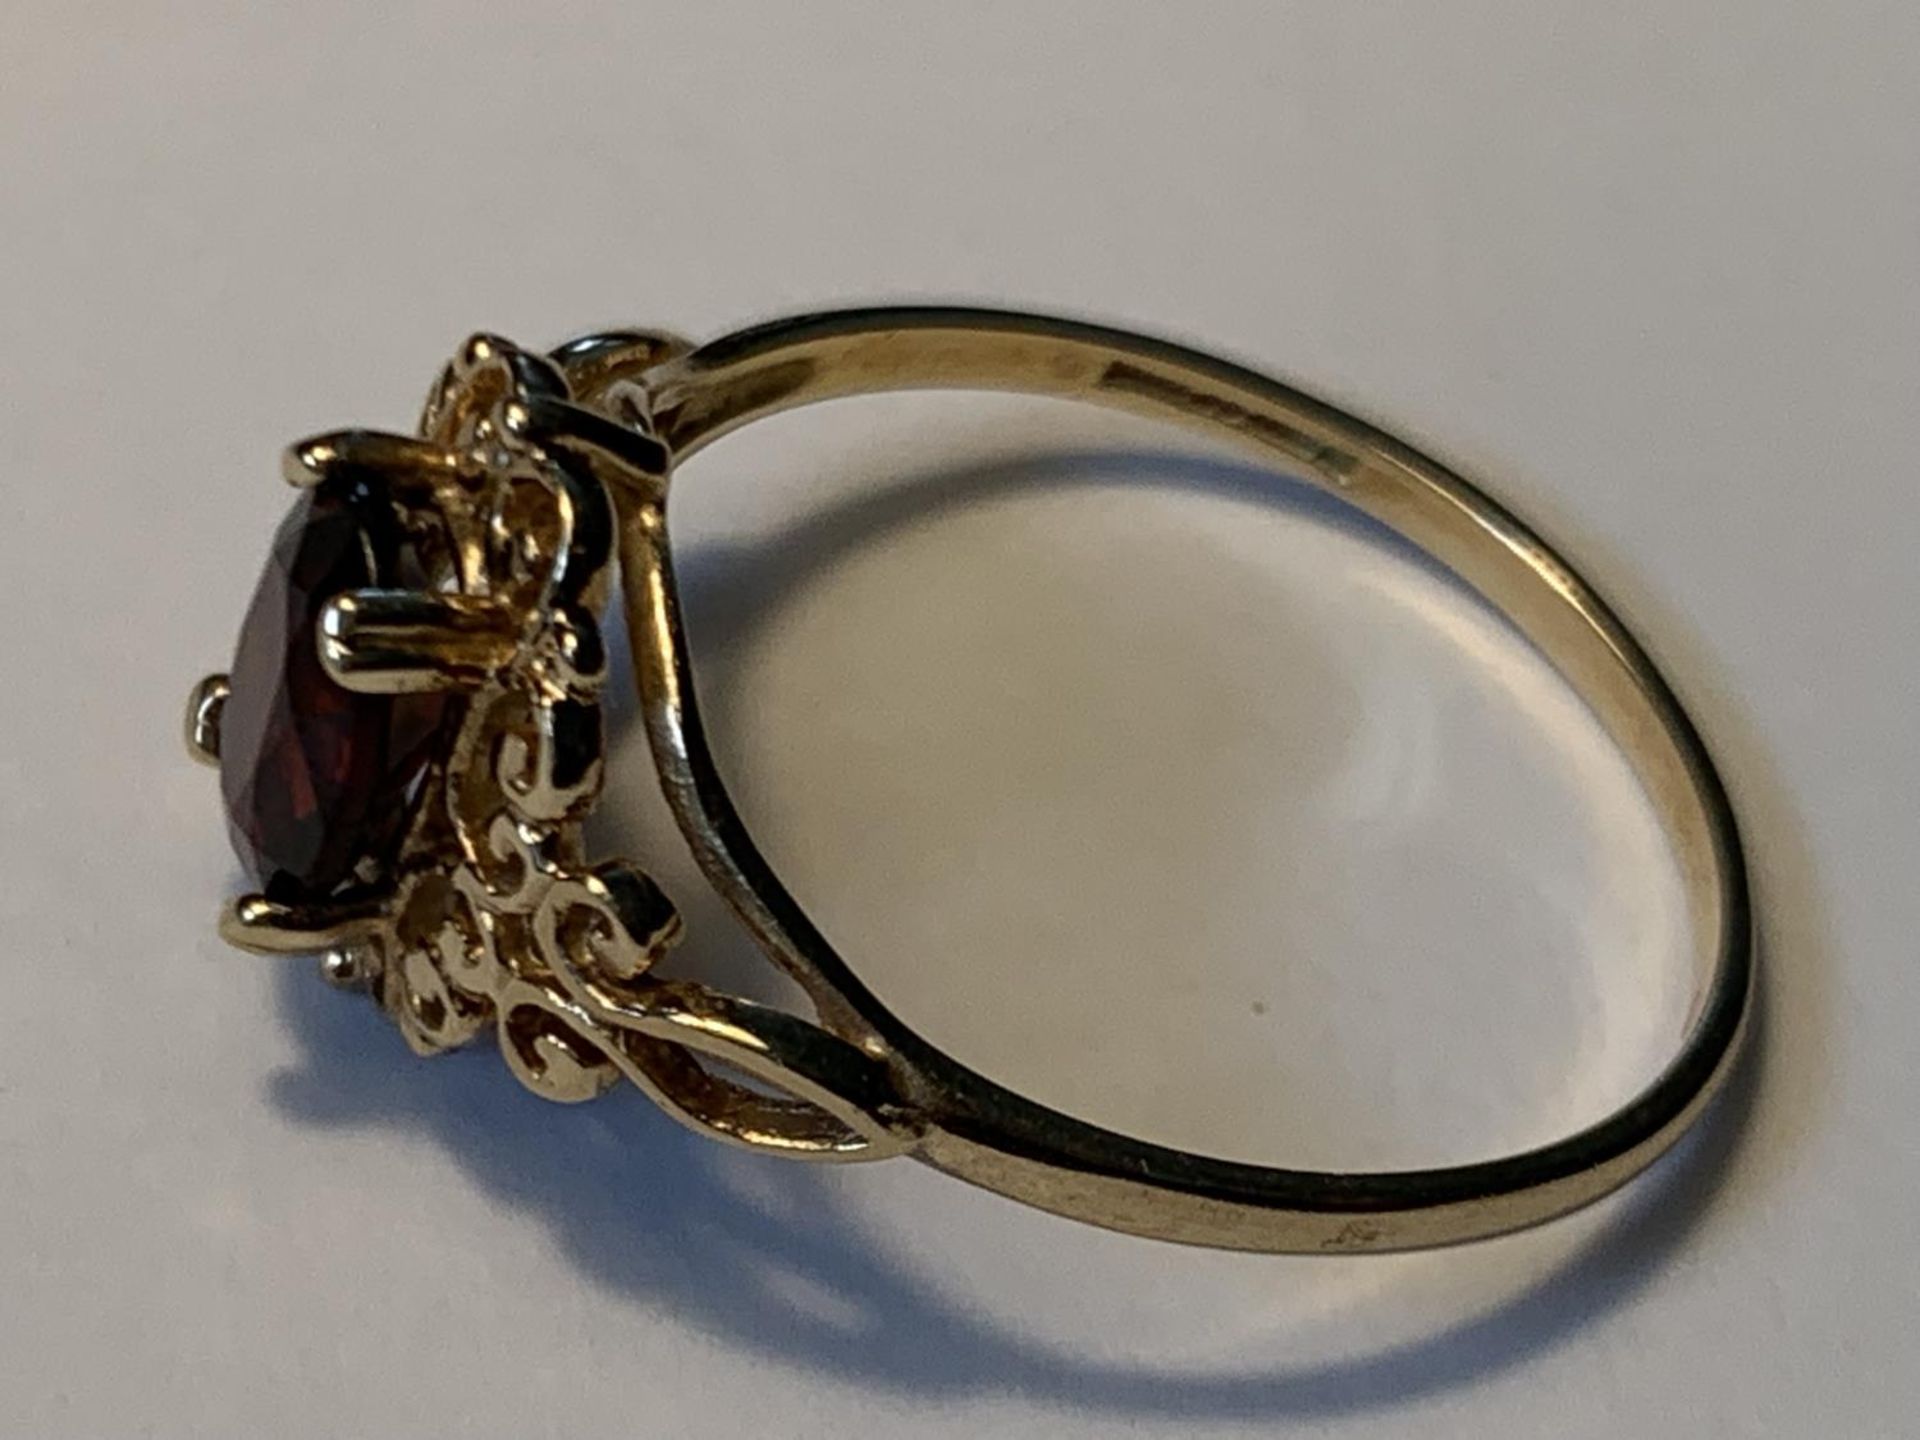 A 9 CARAT GOLD RING WITH A CENTRE GARNET SIZE P GROSS WEIGHT 1.57 GRAMS IN A PRESENTATION BOX - Image 2 of 4